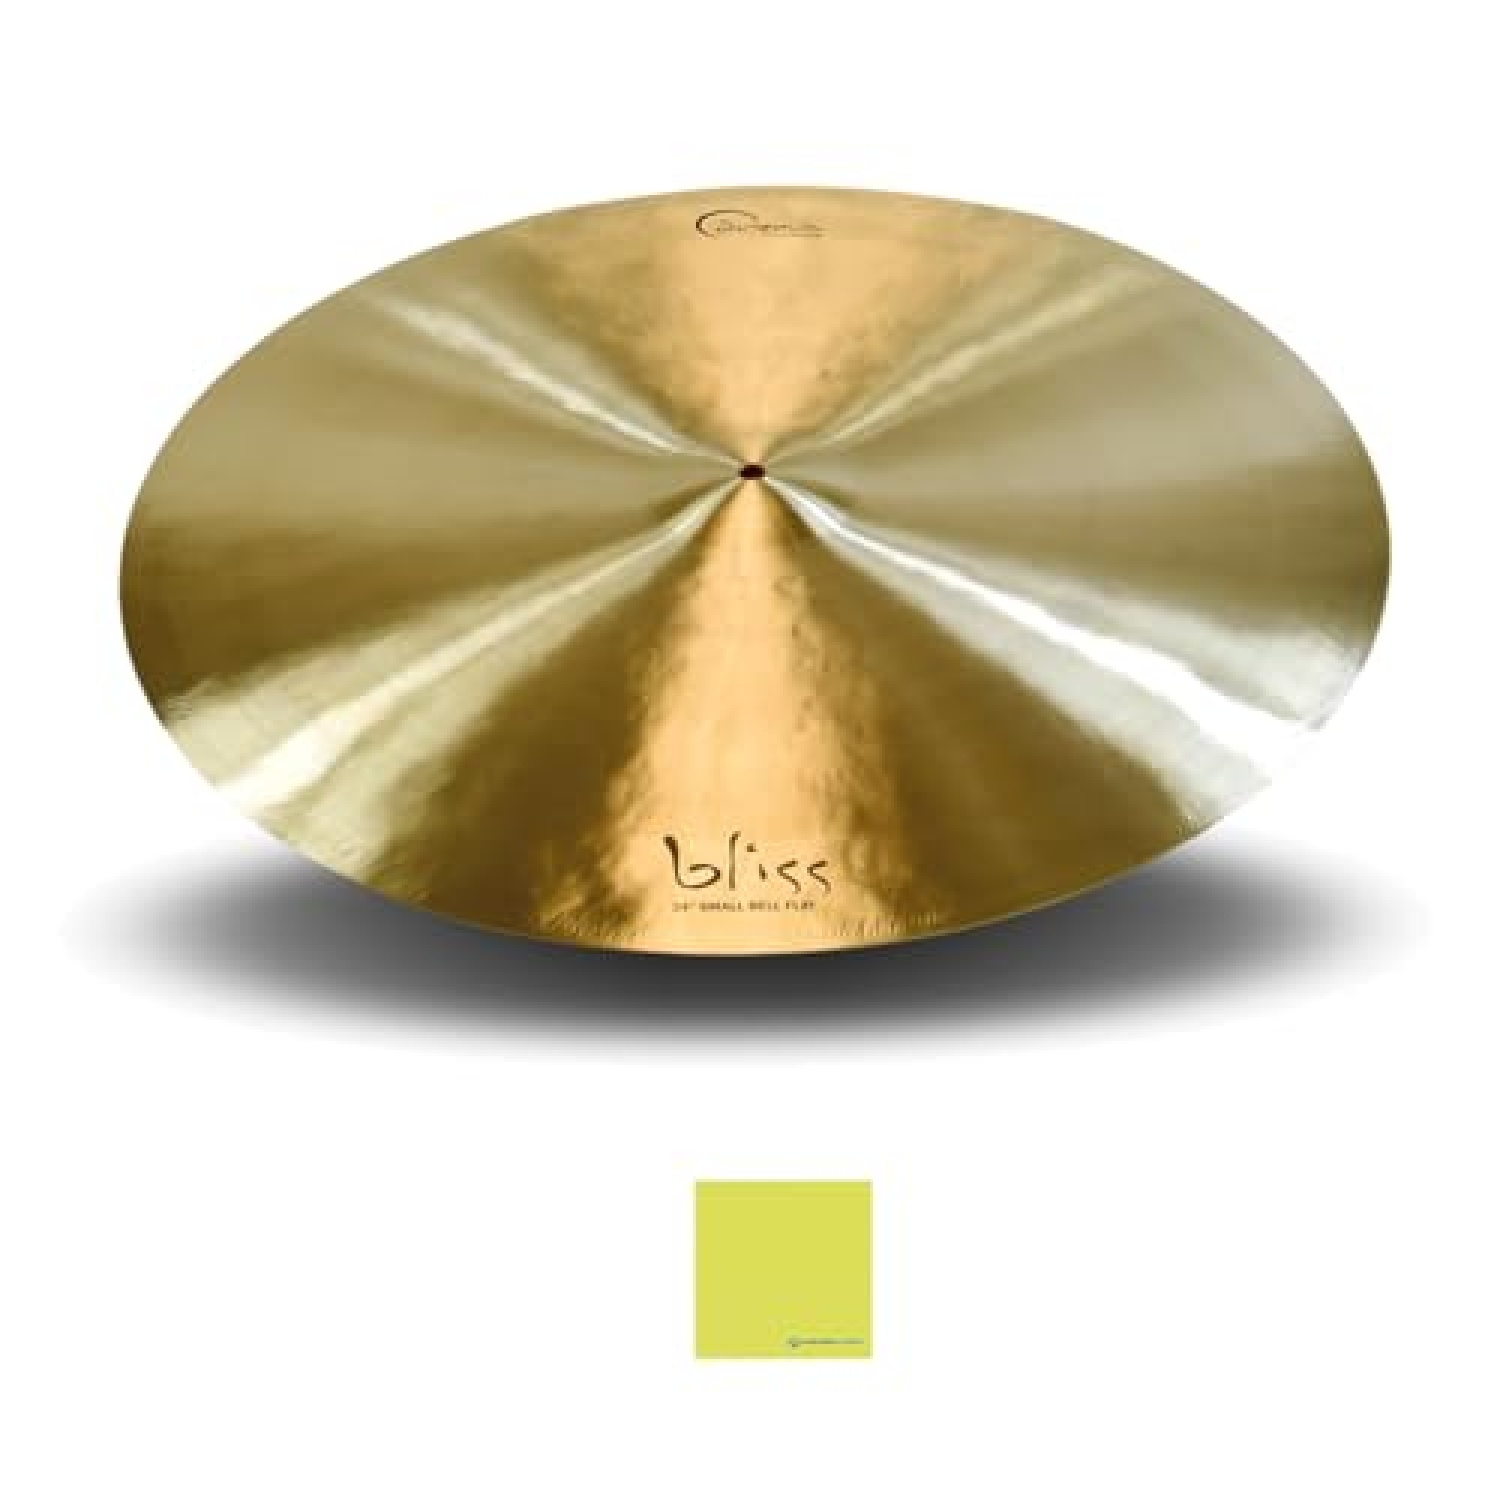 Dream Cymbals and Gongs BSBF24 Bliss Series Small Bell Flat 24" Ride Cymbal Bundle w/Liquid Audio Polishing Cloth